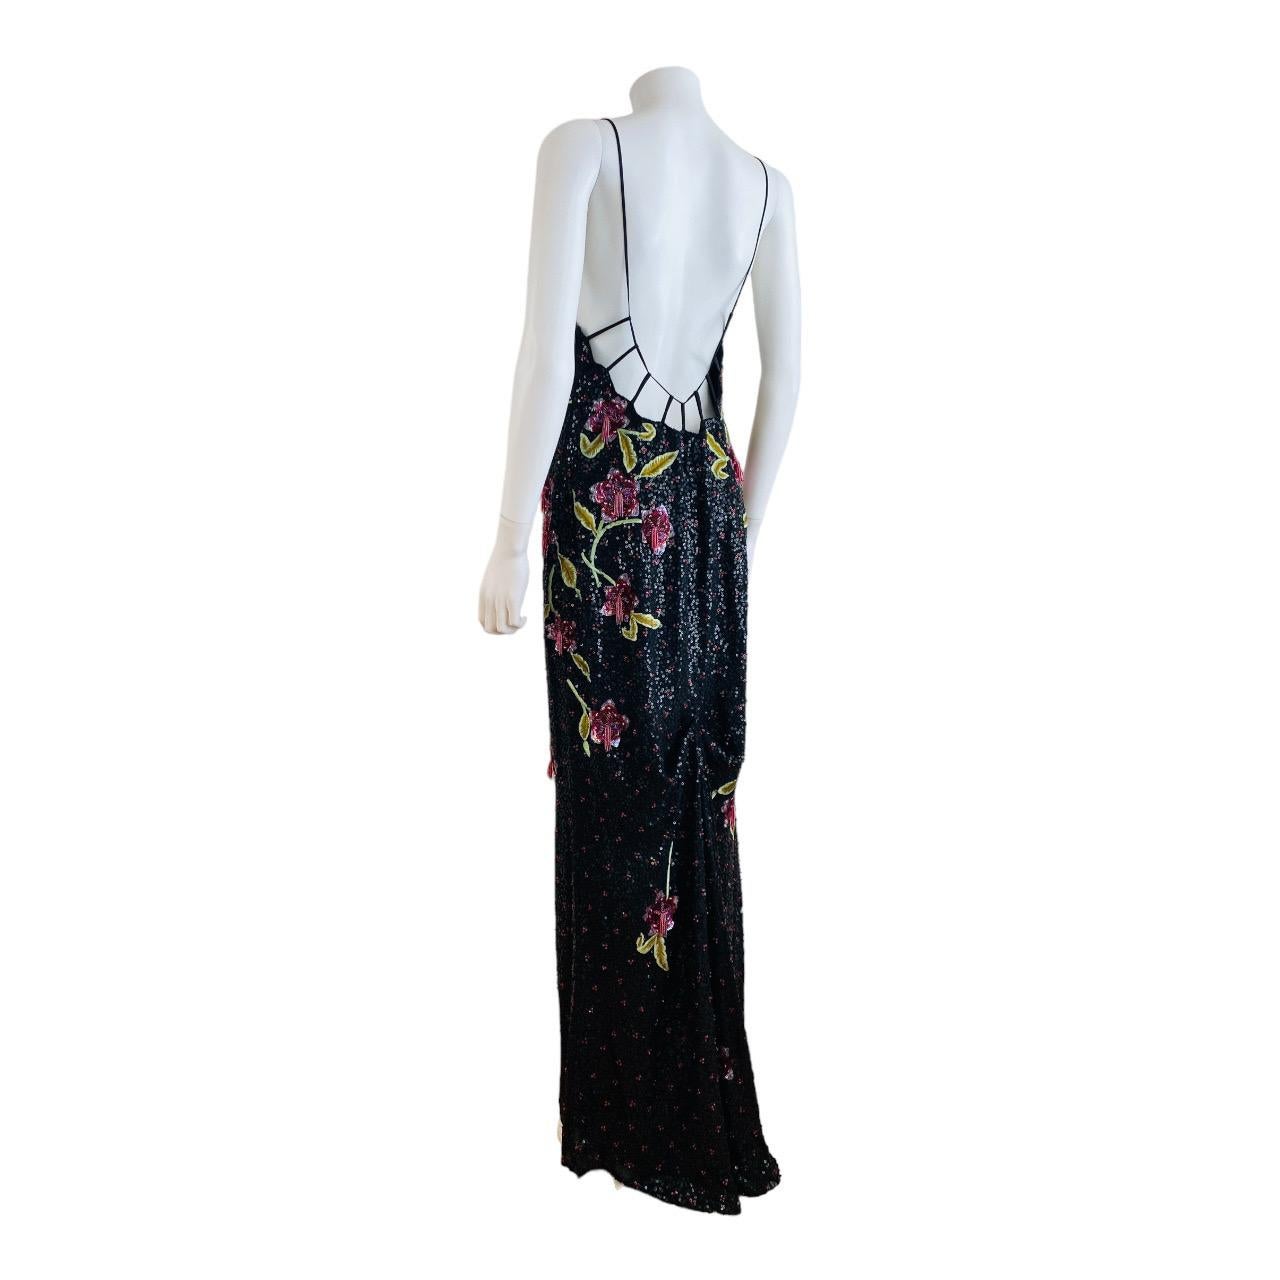 Vintage 2002 Escada Hand Beaded Sequin Floral Maxi Dress Gown Black Pink Flowers For Sale 6